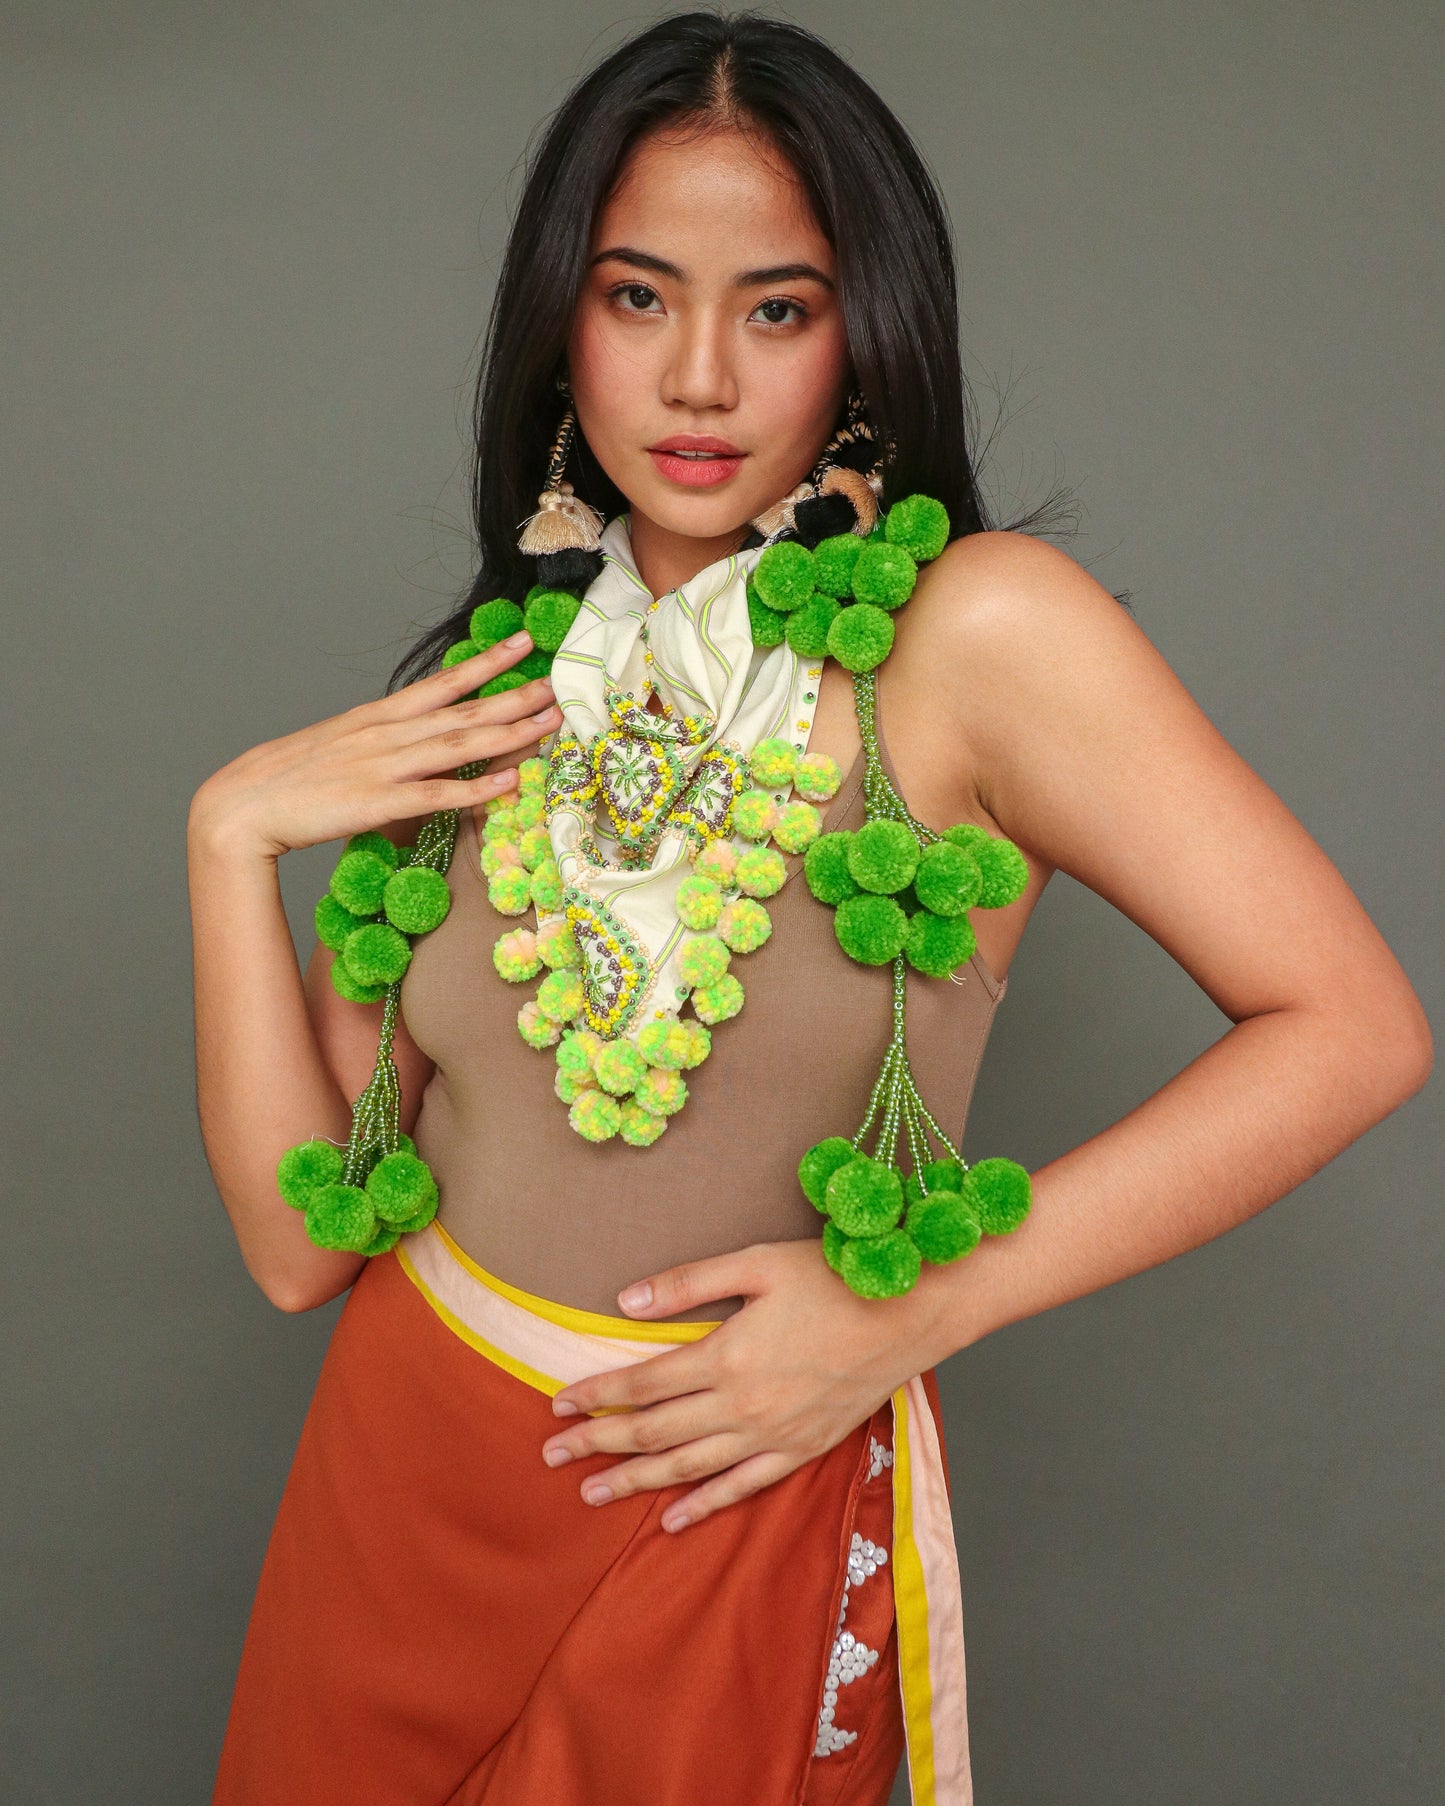 Tangkulo Scarf of Bagobo in Digos in Lime Green